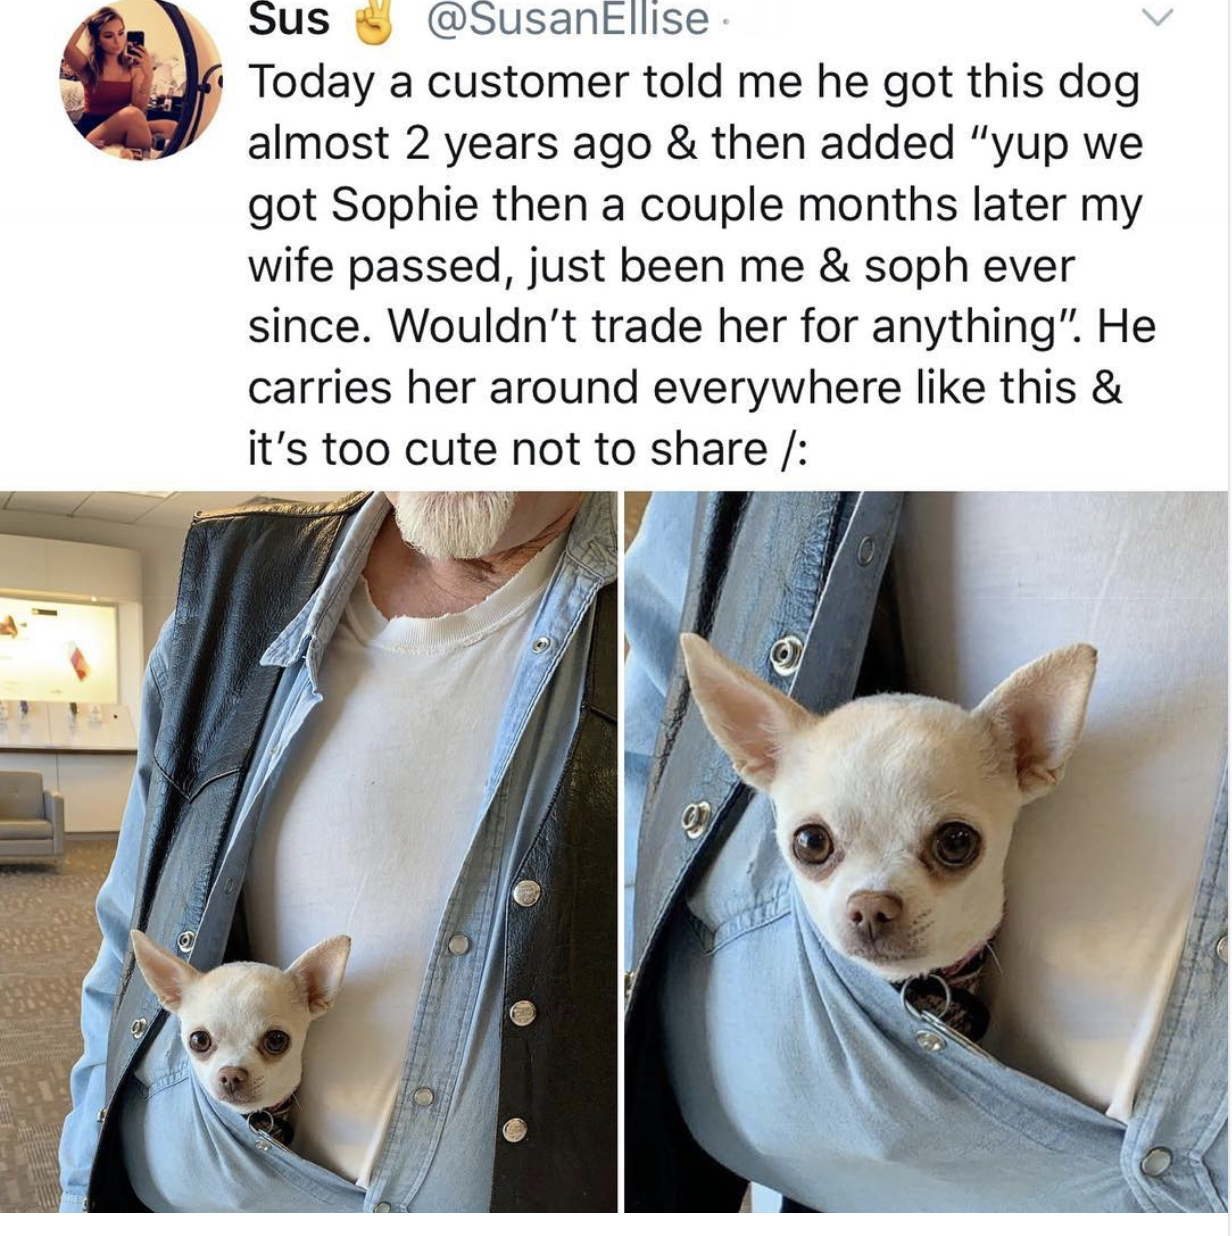 photo caption - Sus Ellise Today a customer told me he got this dog almost 2 years ago & then added "yup we got Sophie then a couple months later my wife passed, just been me & soph ever since. Wouldn't trade her for anything". He carries her around every